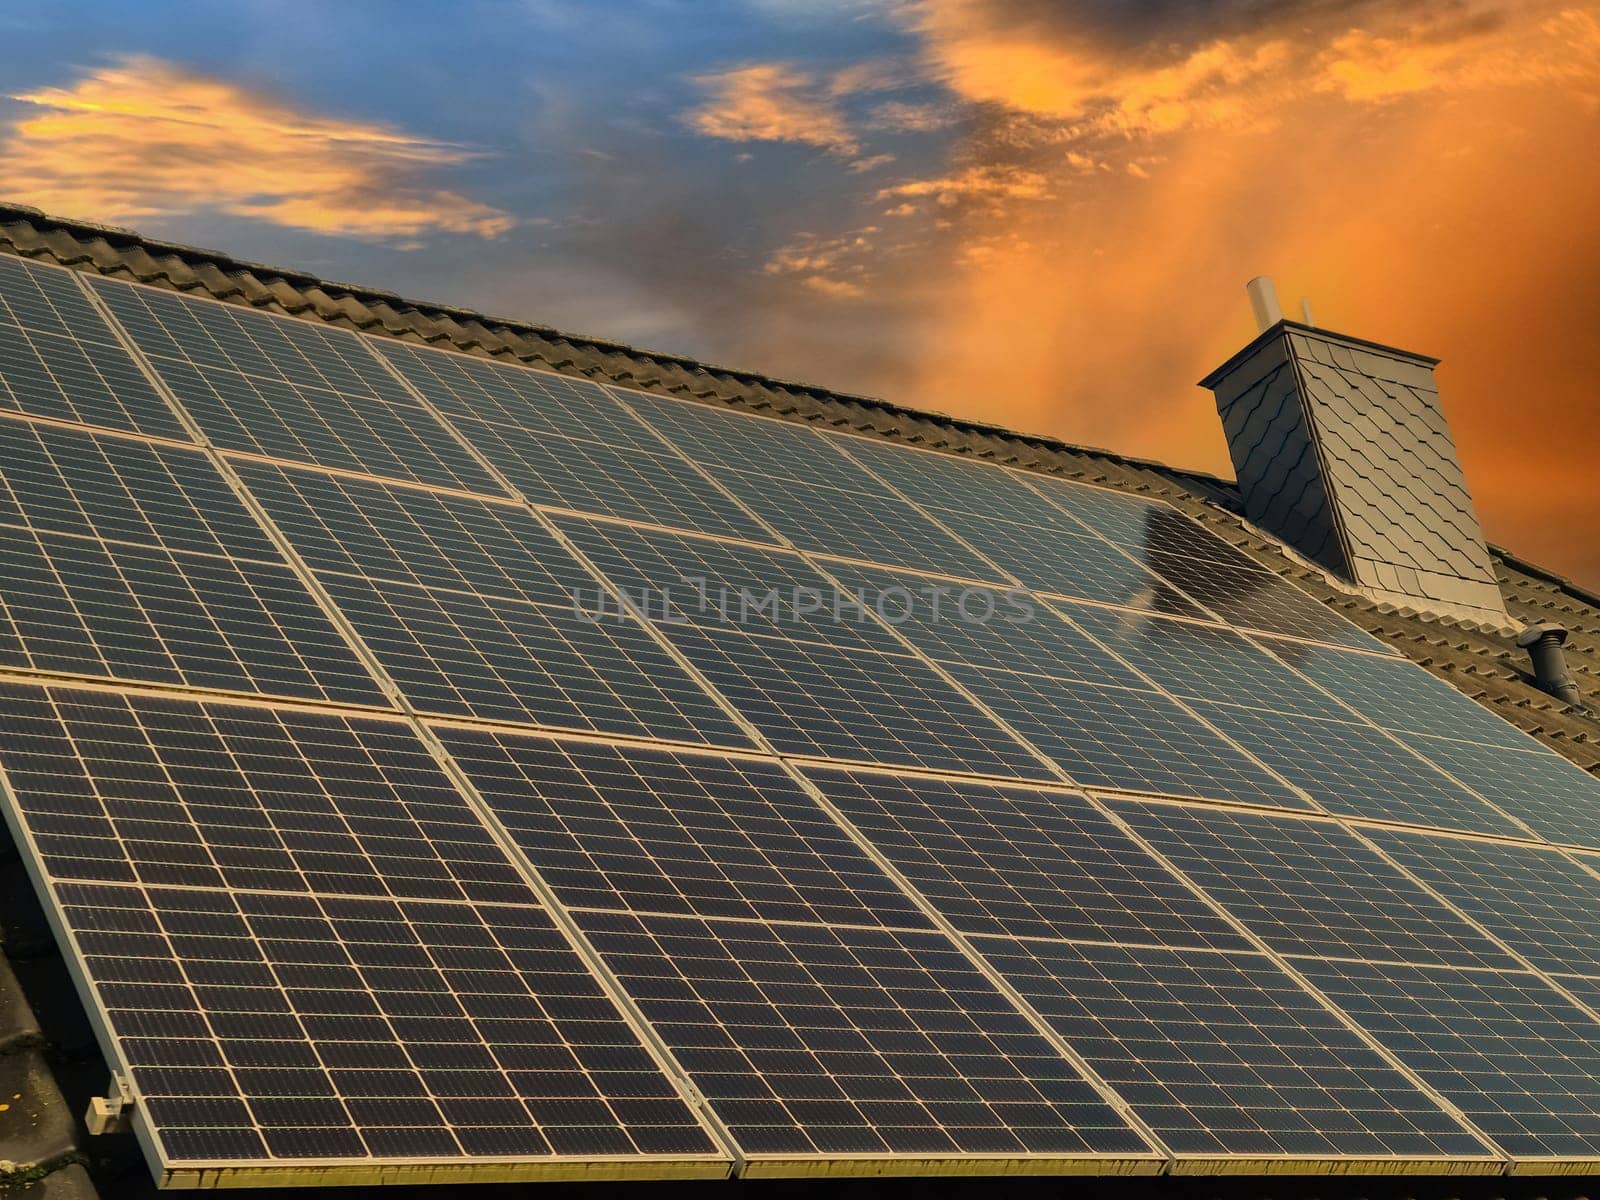 Lots of solar panels producing clean energy on a roof of a residential house during sunset